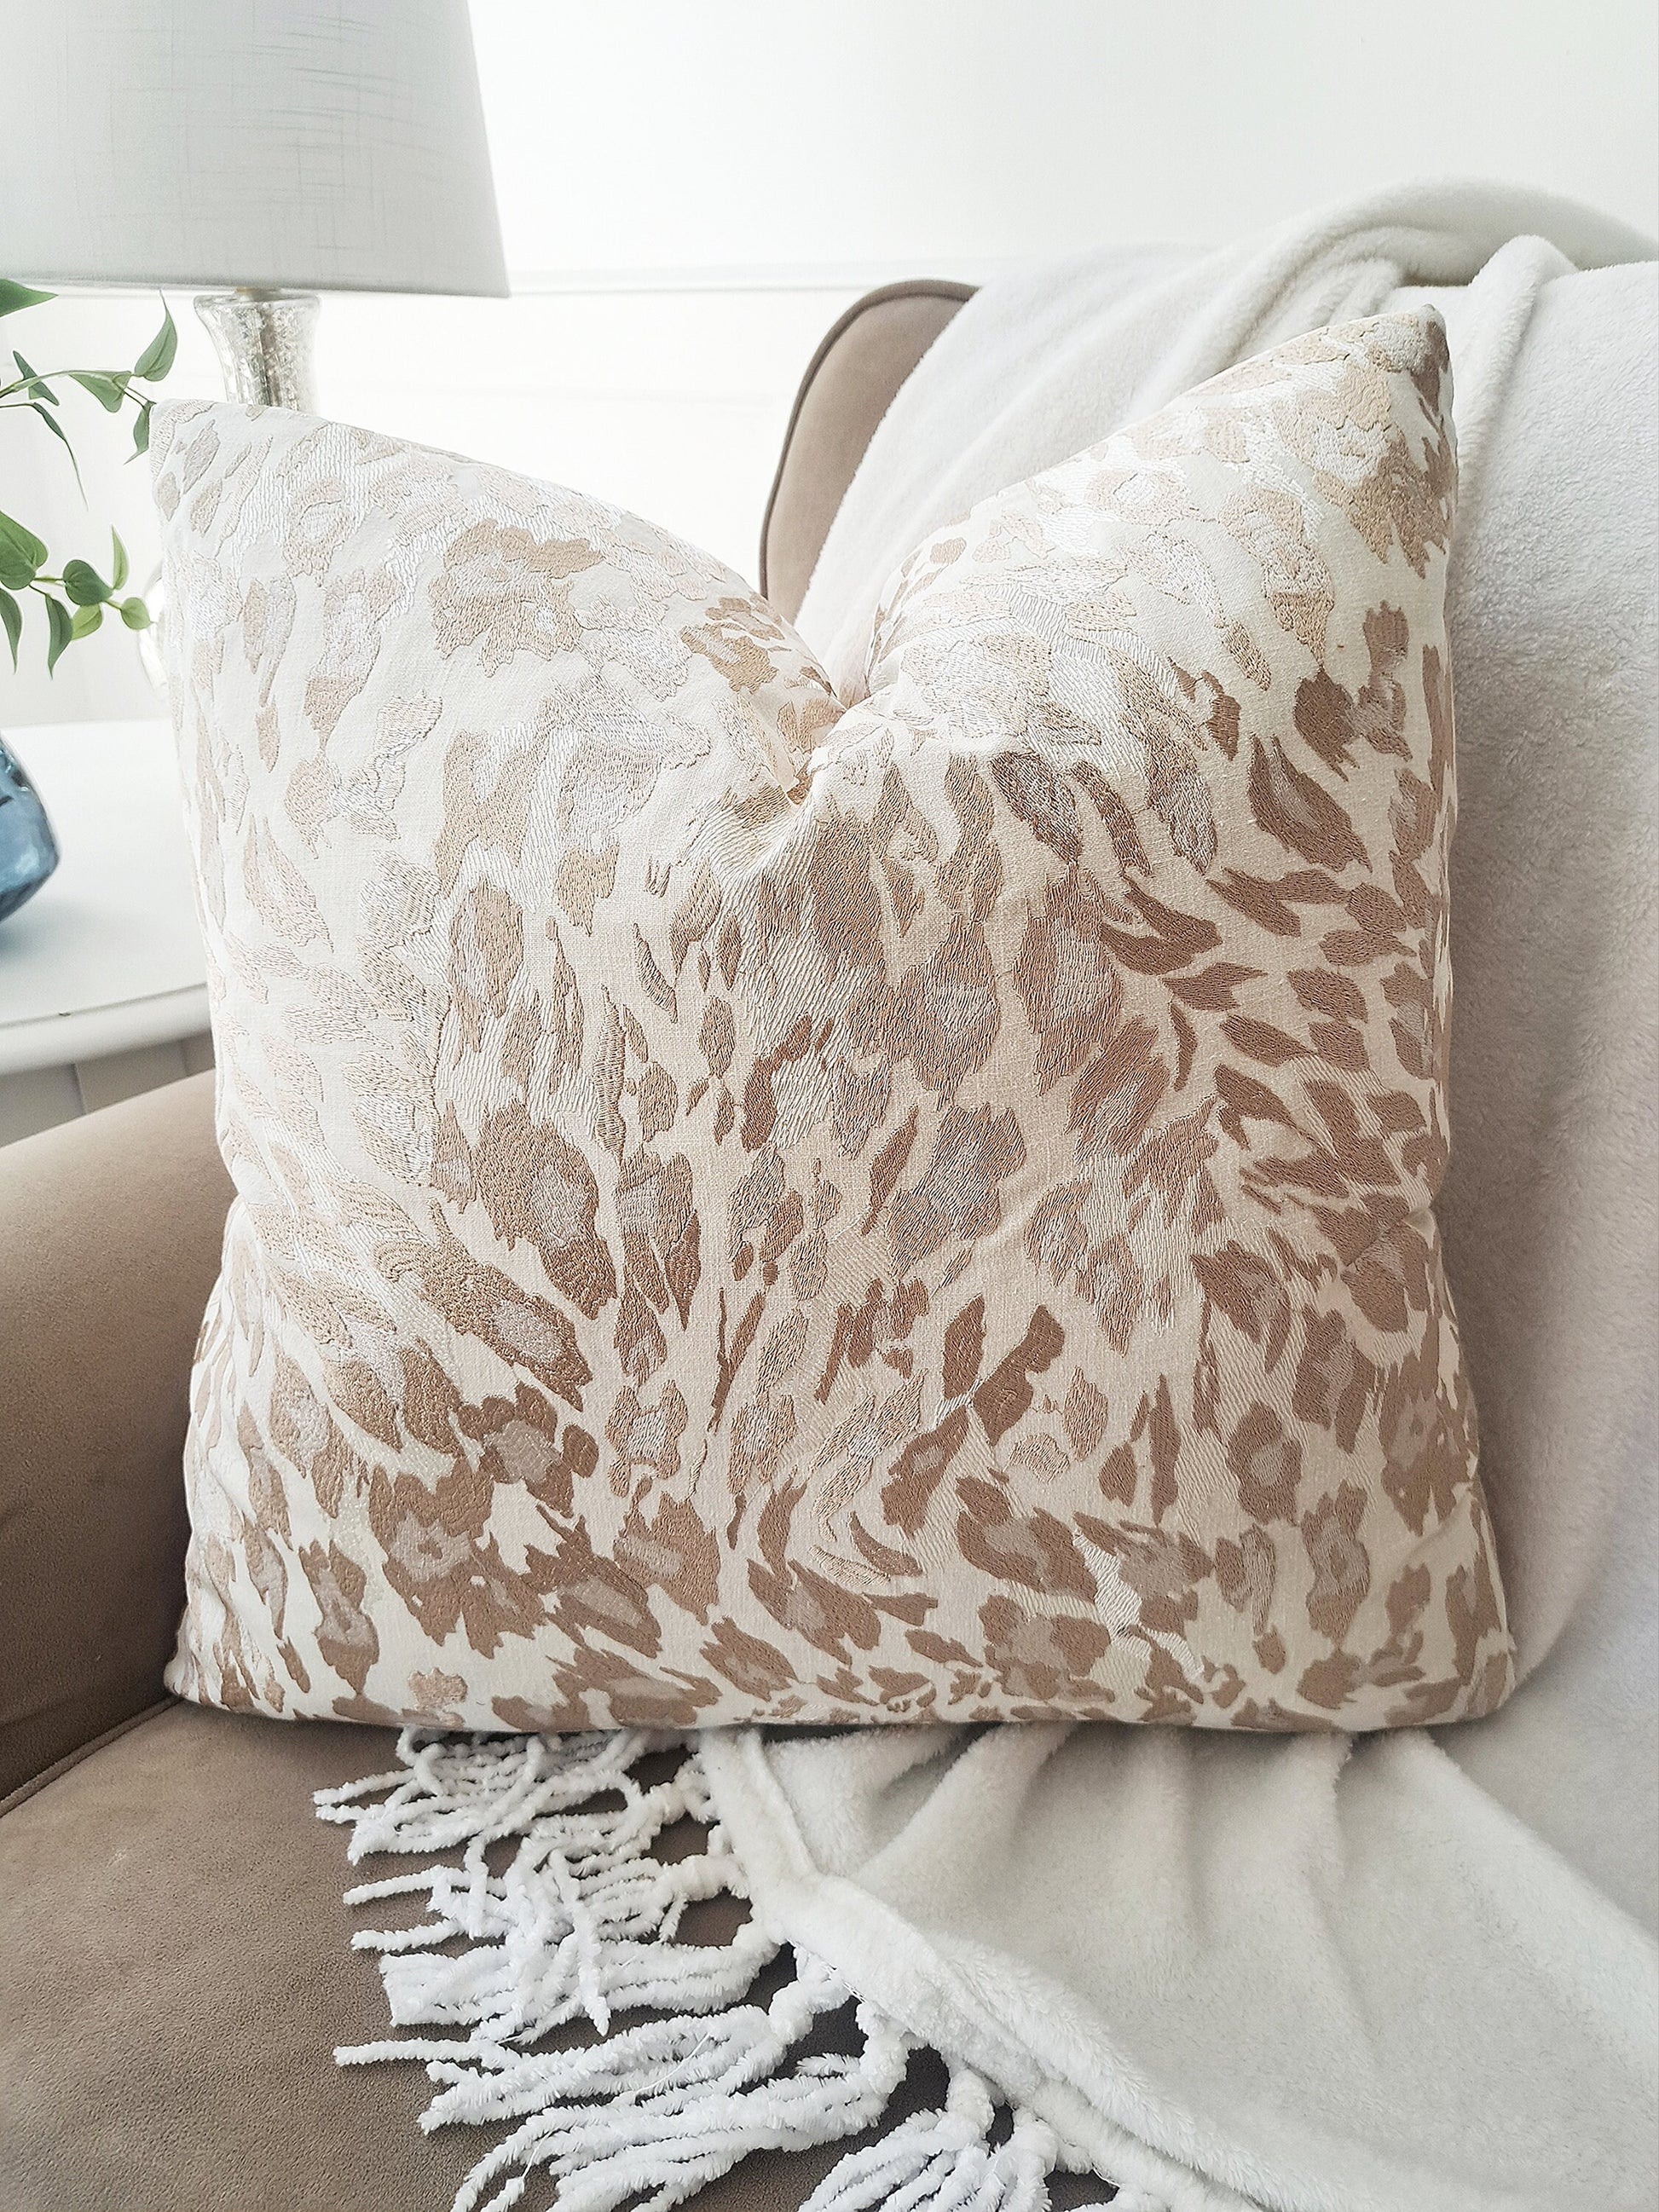 Embroidered Leapard Print Pillow Cover